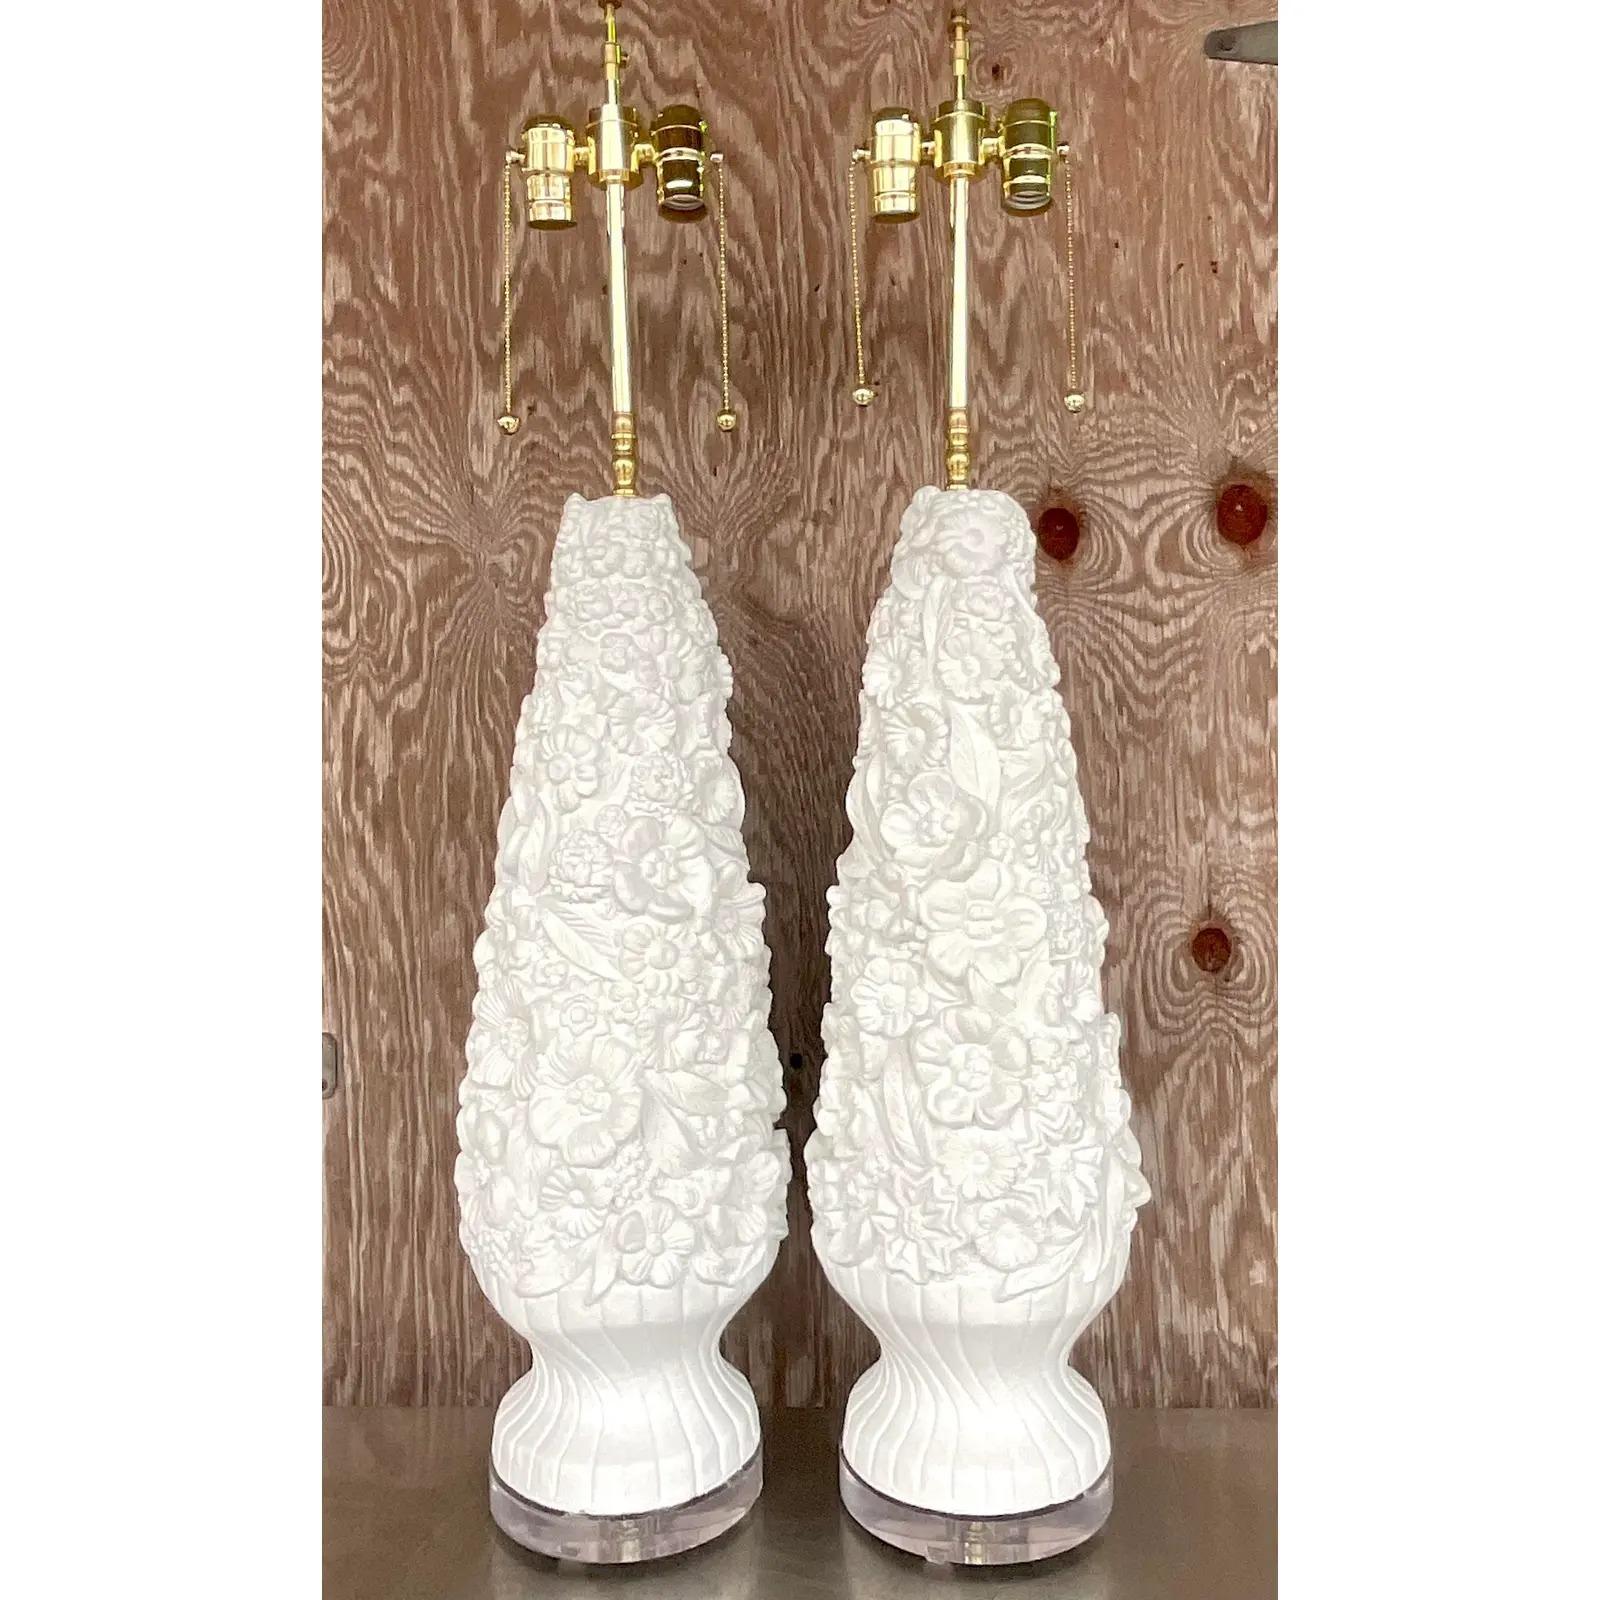 A fantastic pair of vintage Coastal table lamps. A beautiful carved floral design. Fully restored with all new hardware, wiring and lucite plinths. Acquired from a Palm Beach estate.